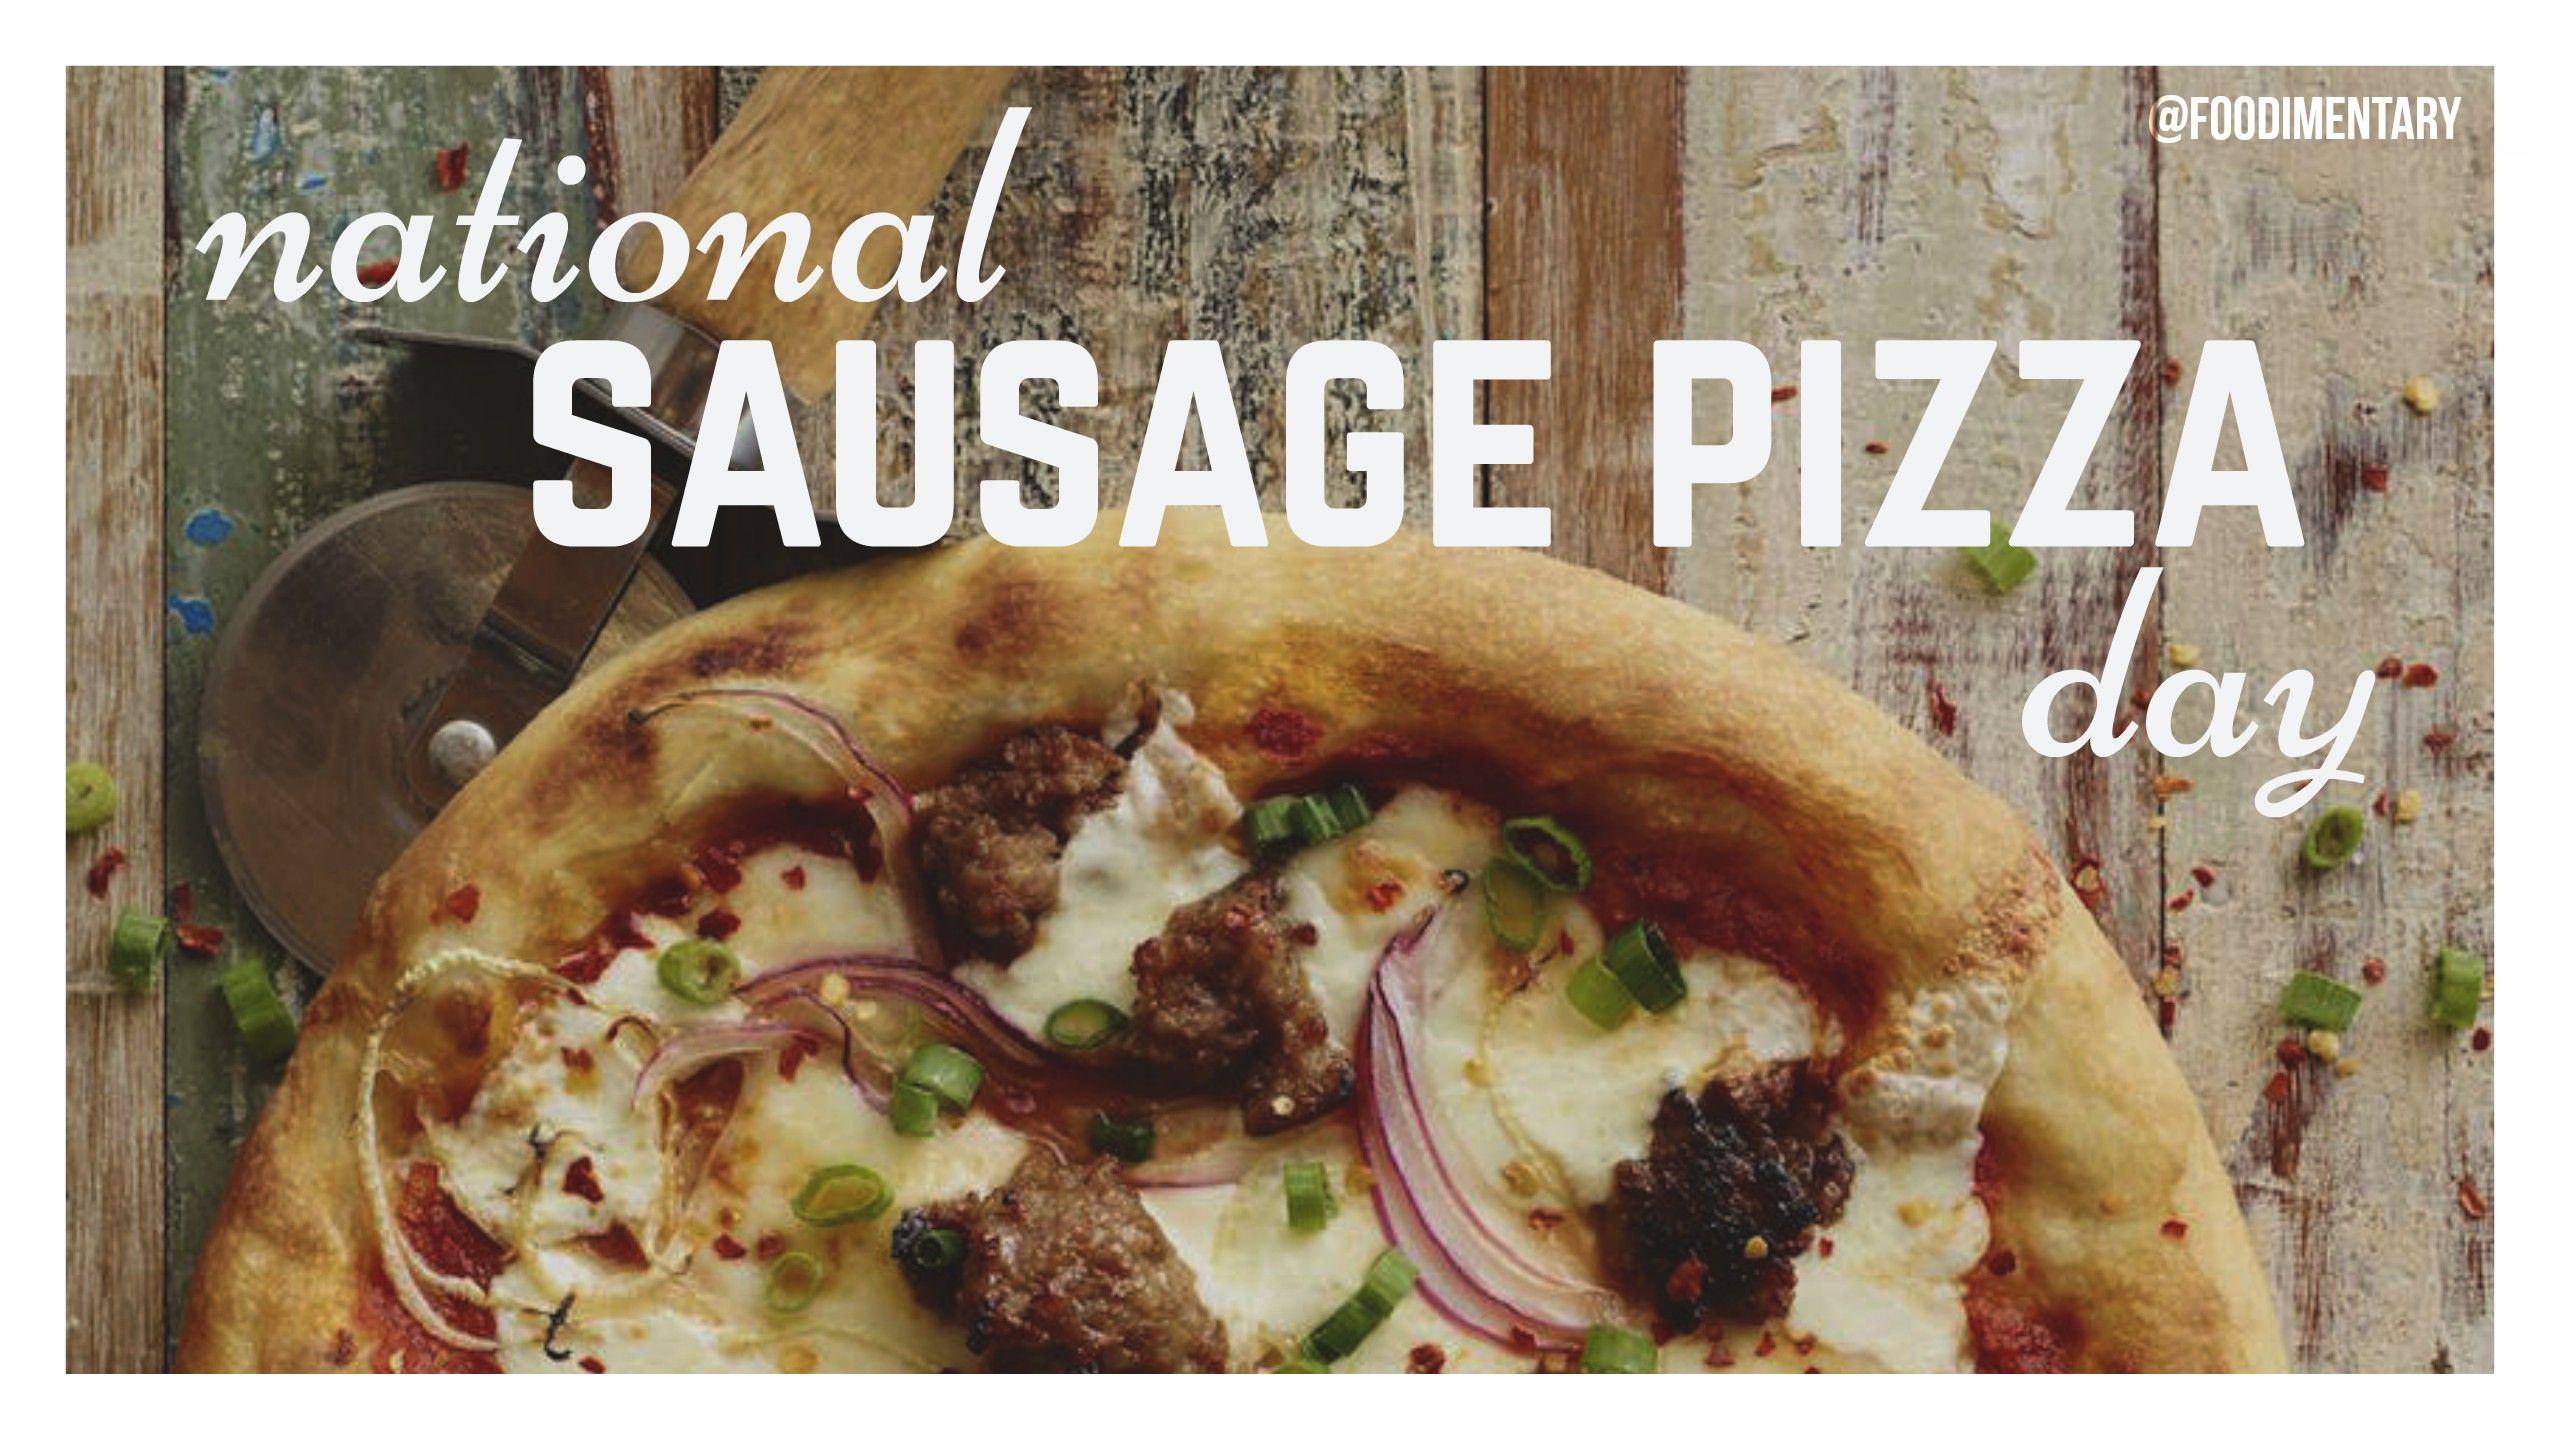 October 11th is National Sausage Pizza Day!. Foodimentary